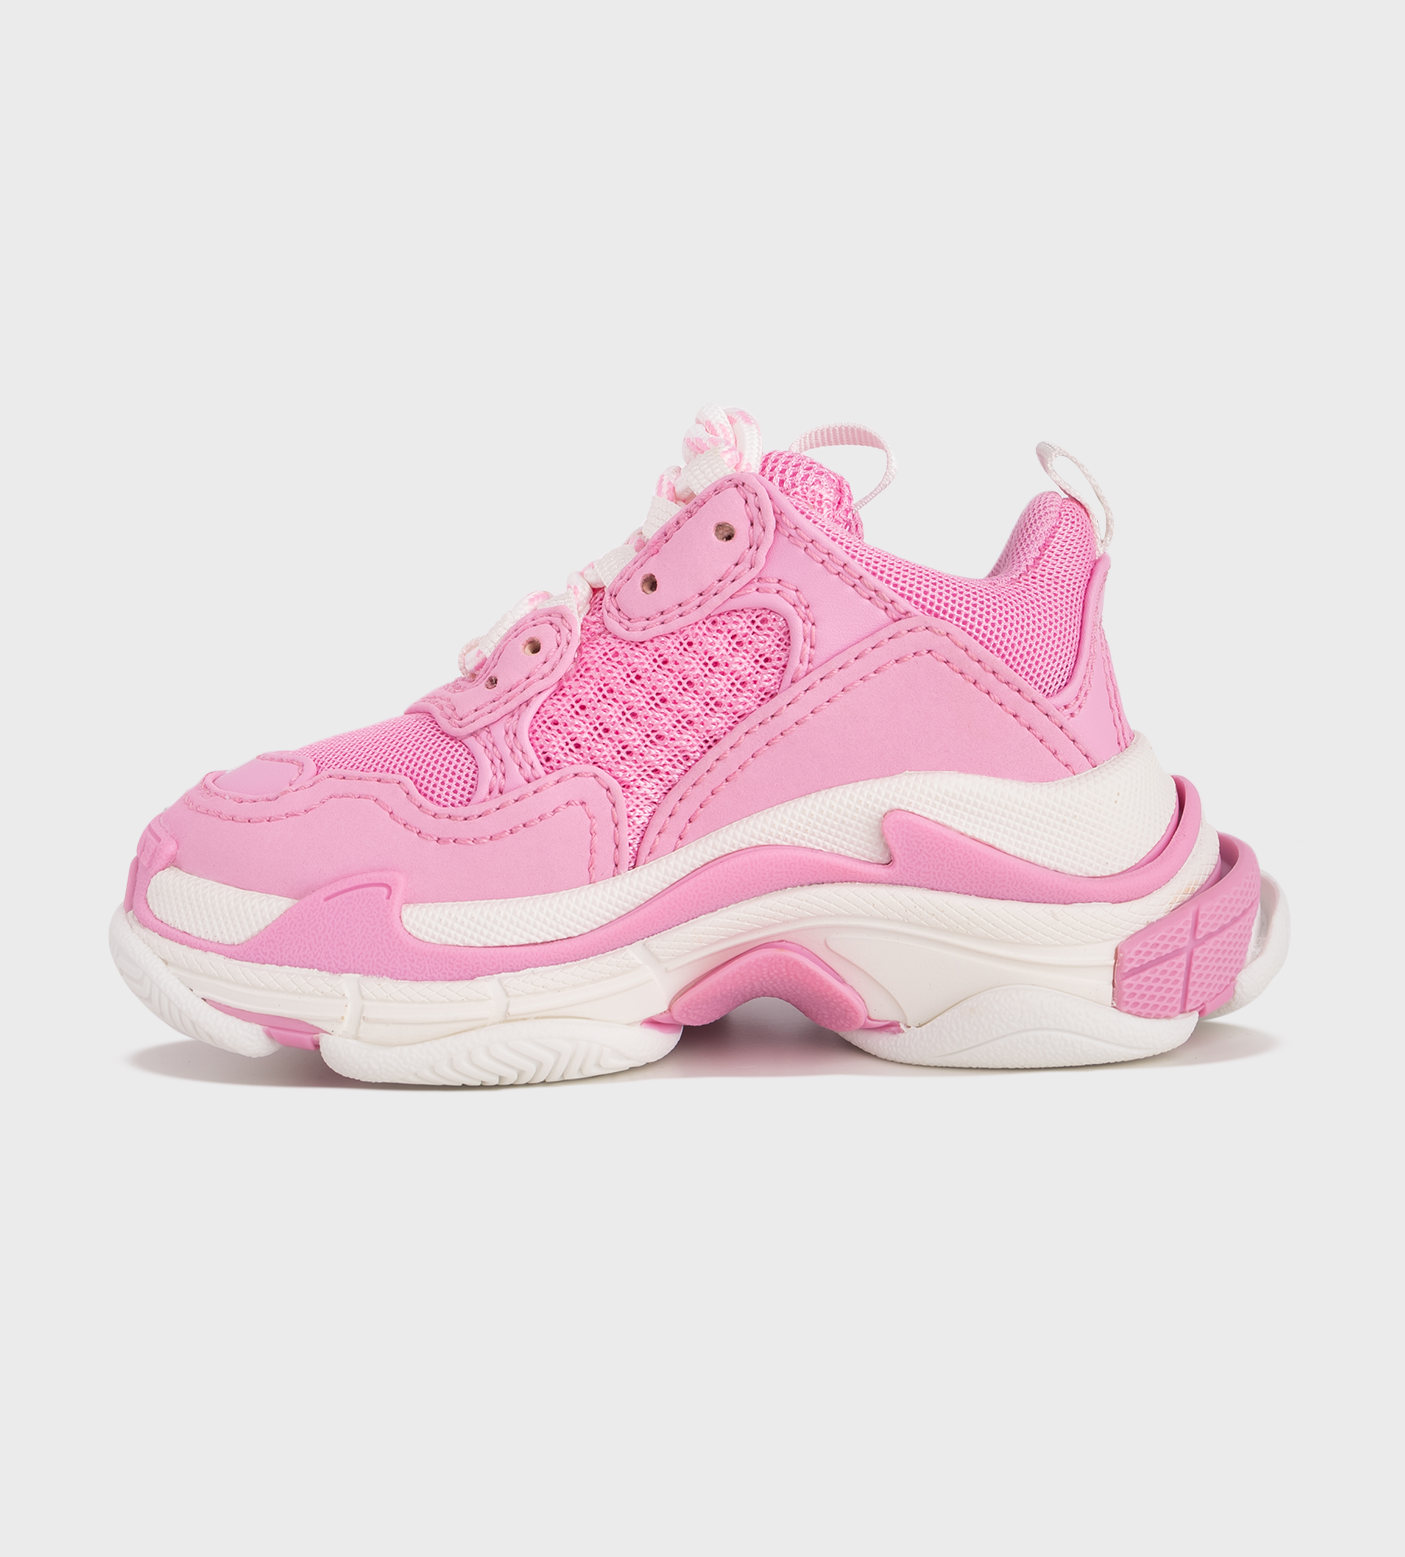 Triple S Sneakers Pink/White